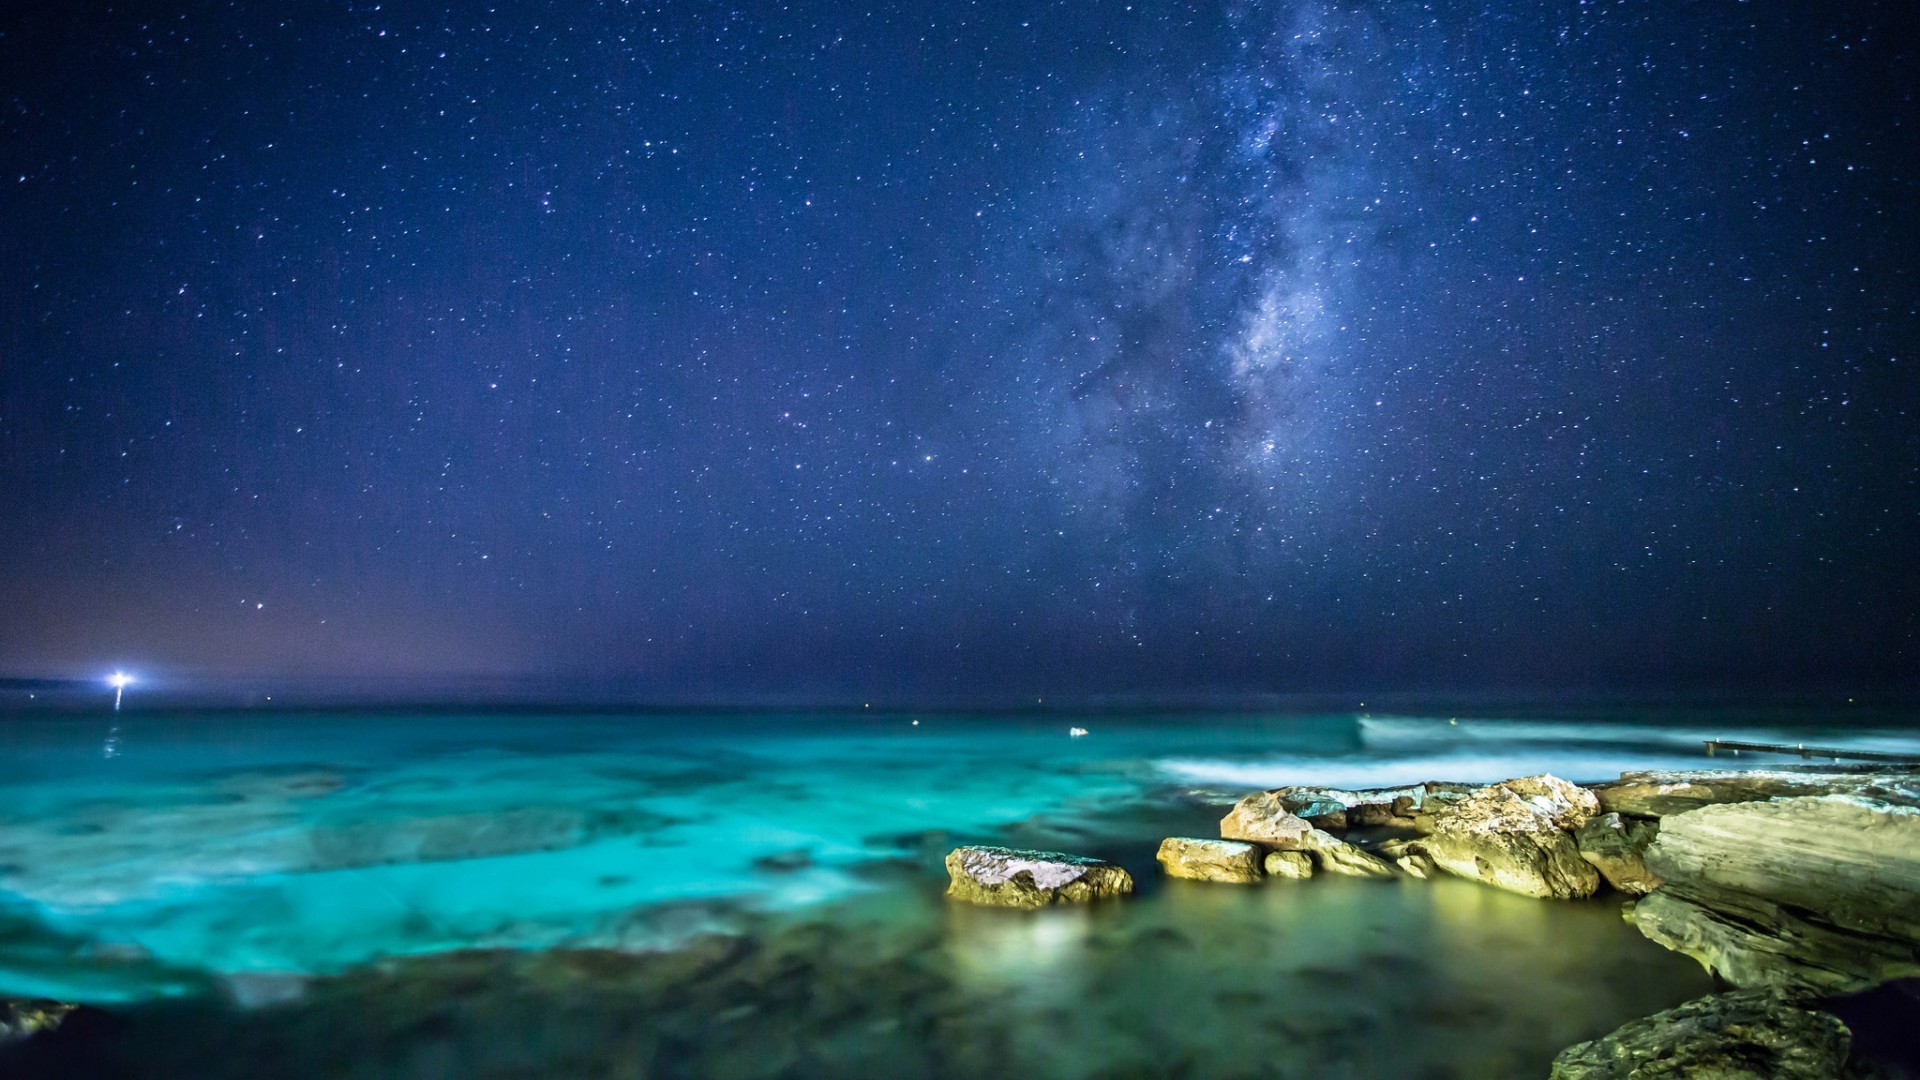 Starry sky over the ocean - Phone wallpapers